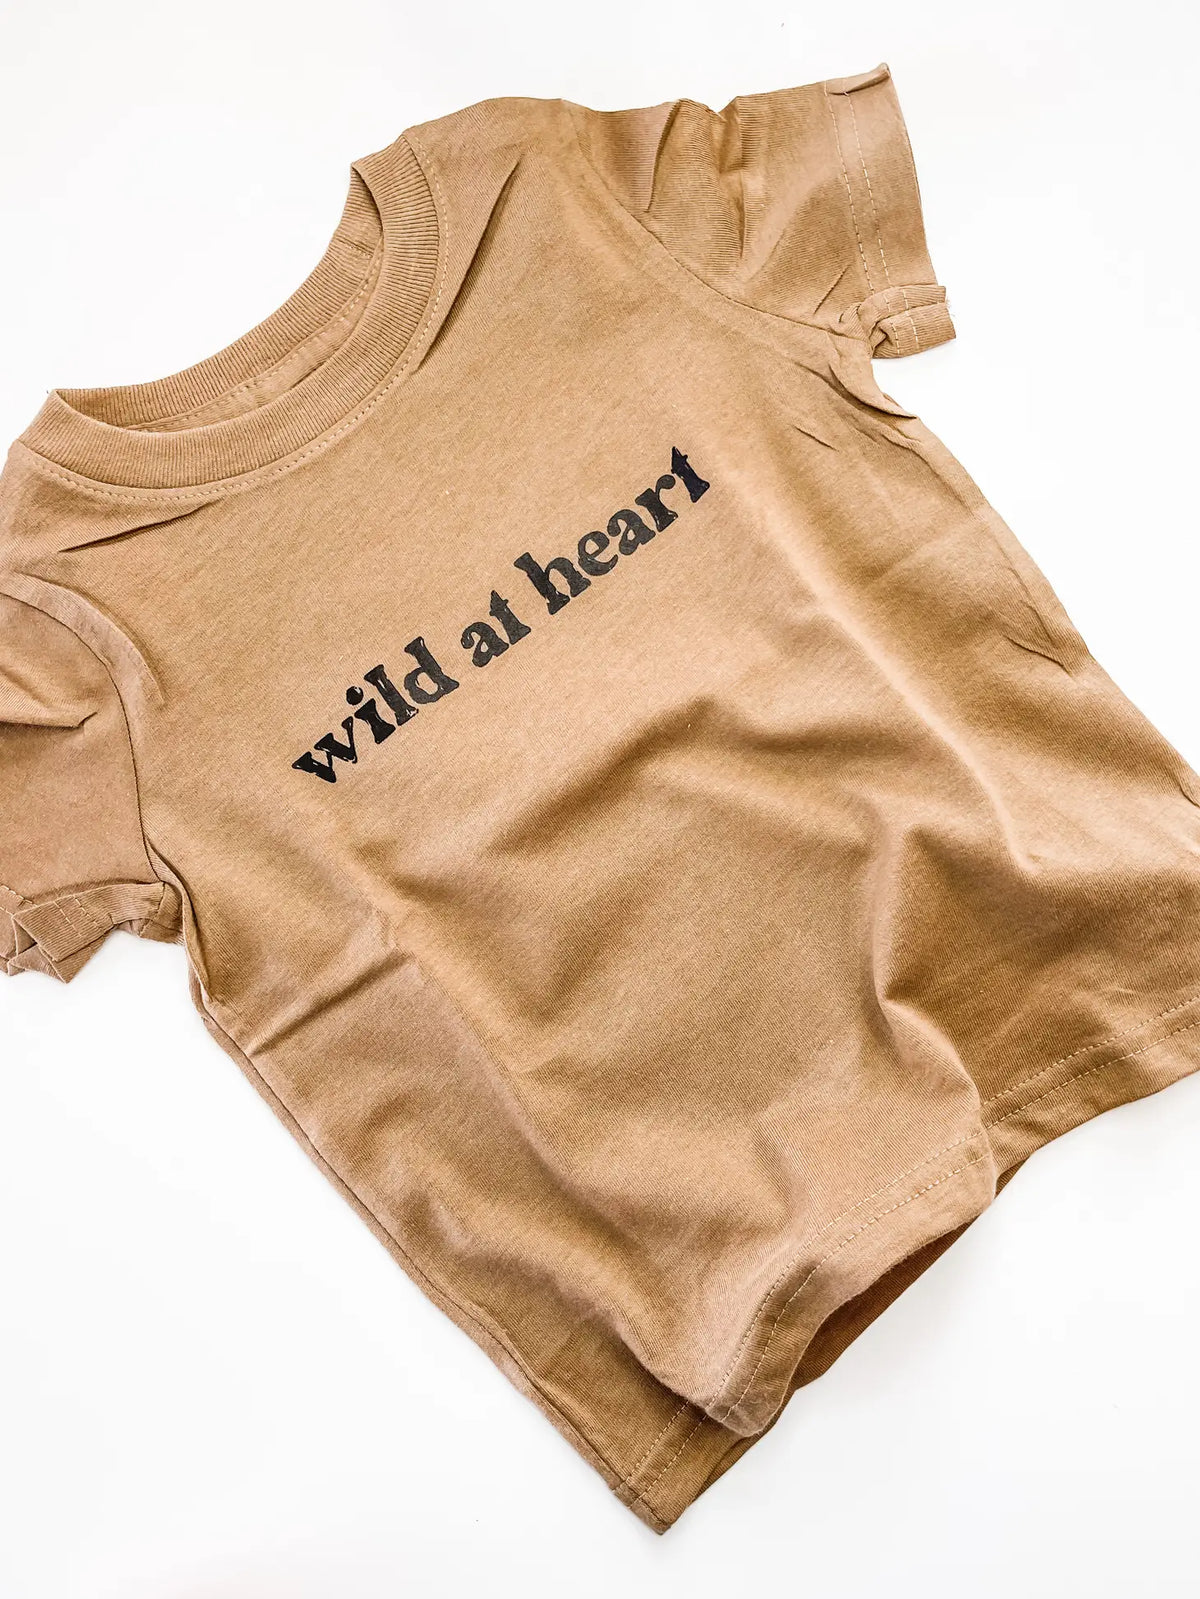 Wild at Heart - KC Outfitter